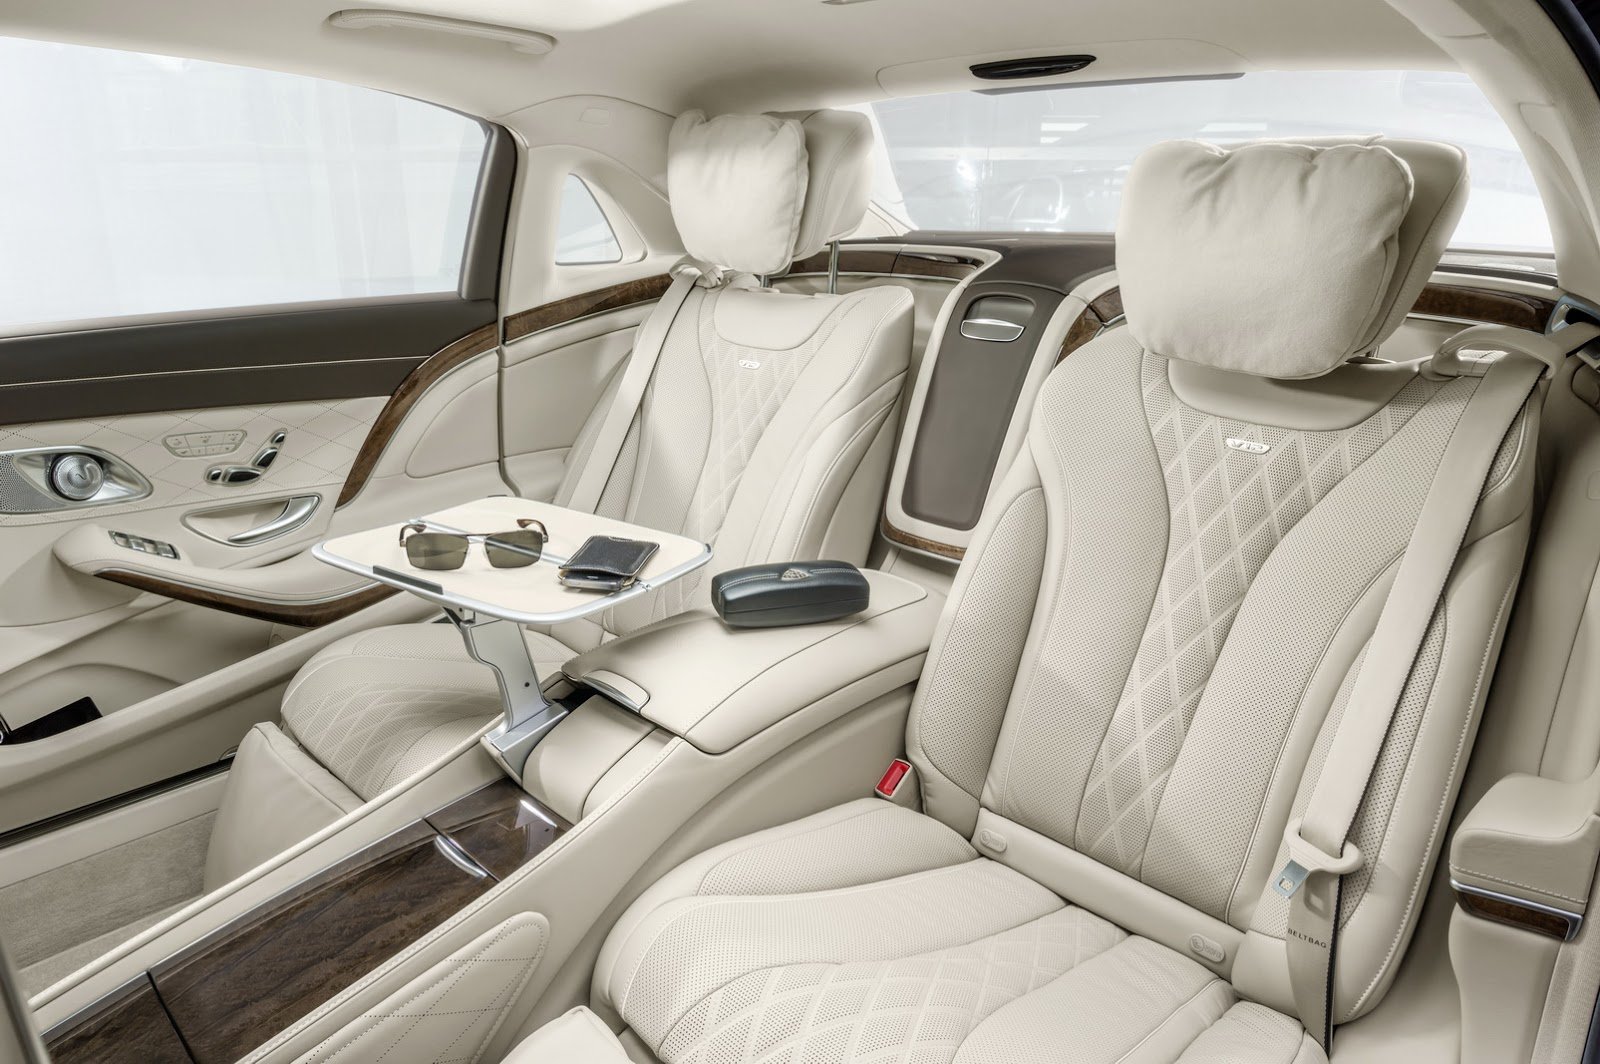 2015, Mercedes, Maybach, S class, Luxury, Limousine, Cars Wallpaper